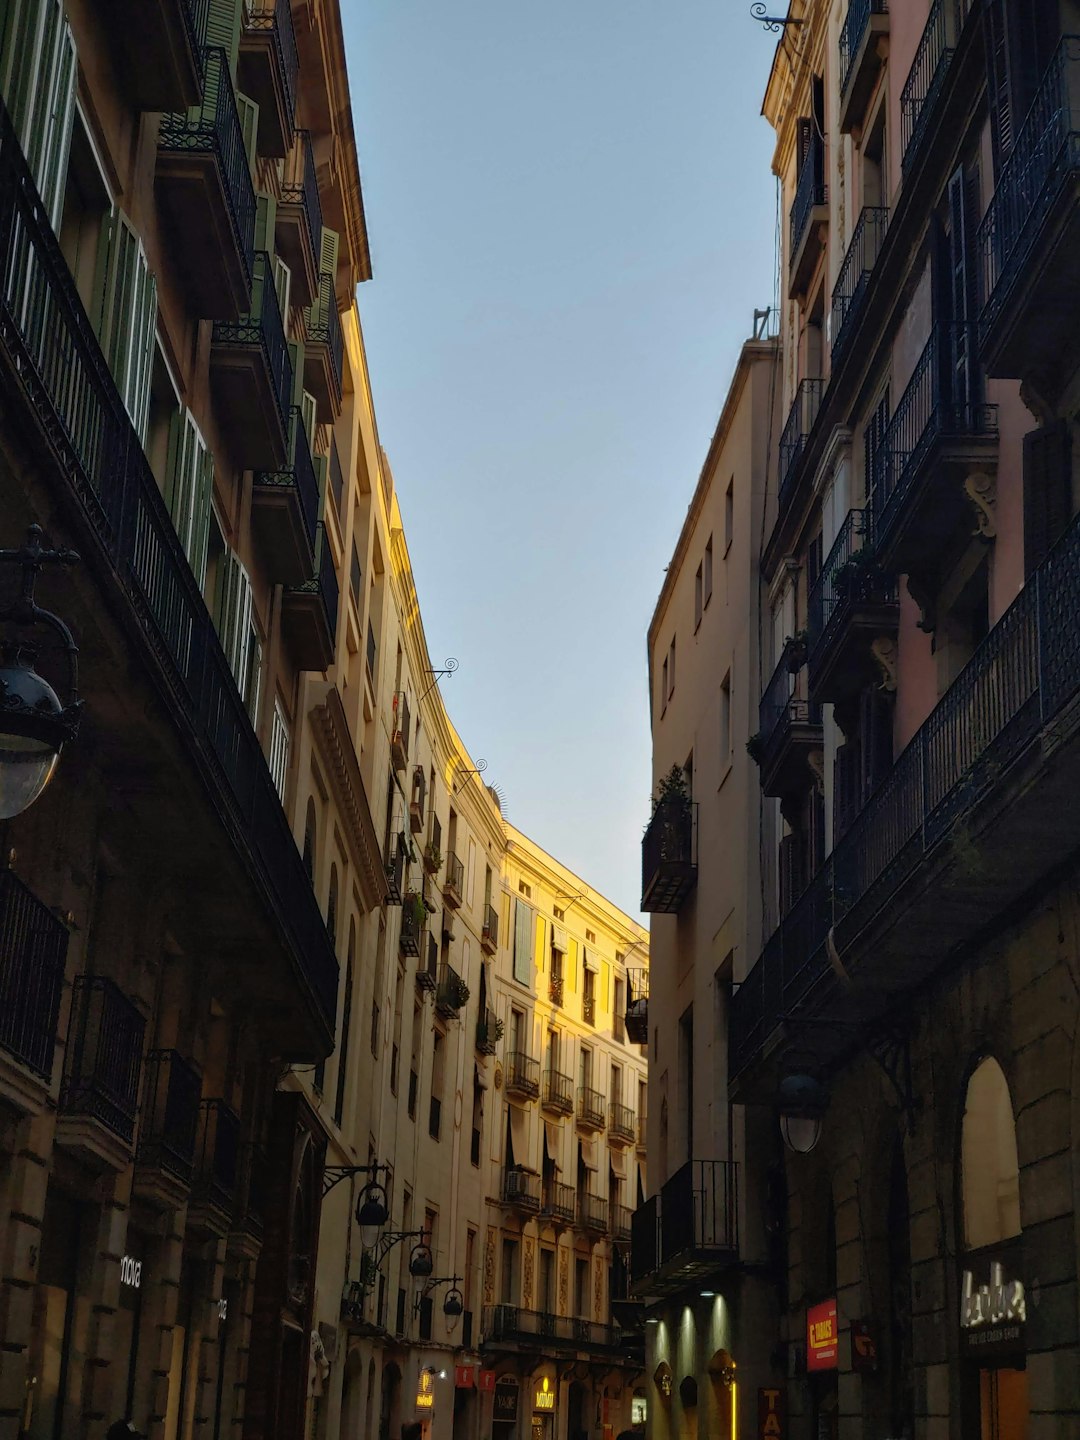 Travel Tips and Stories of Gothic Quarter in Spain